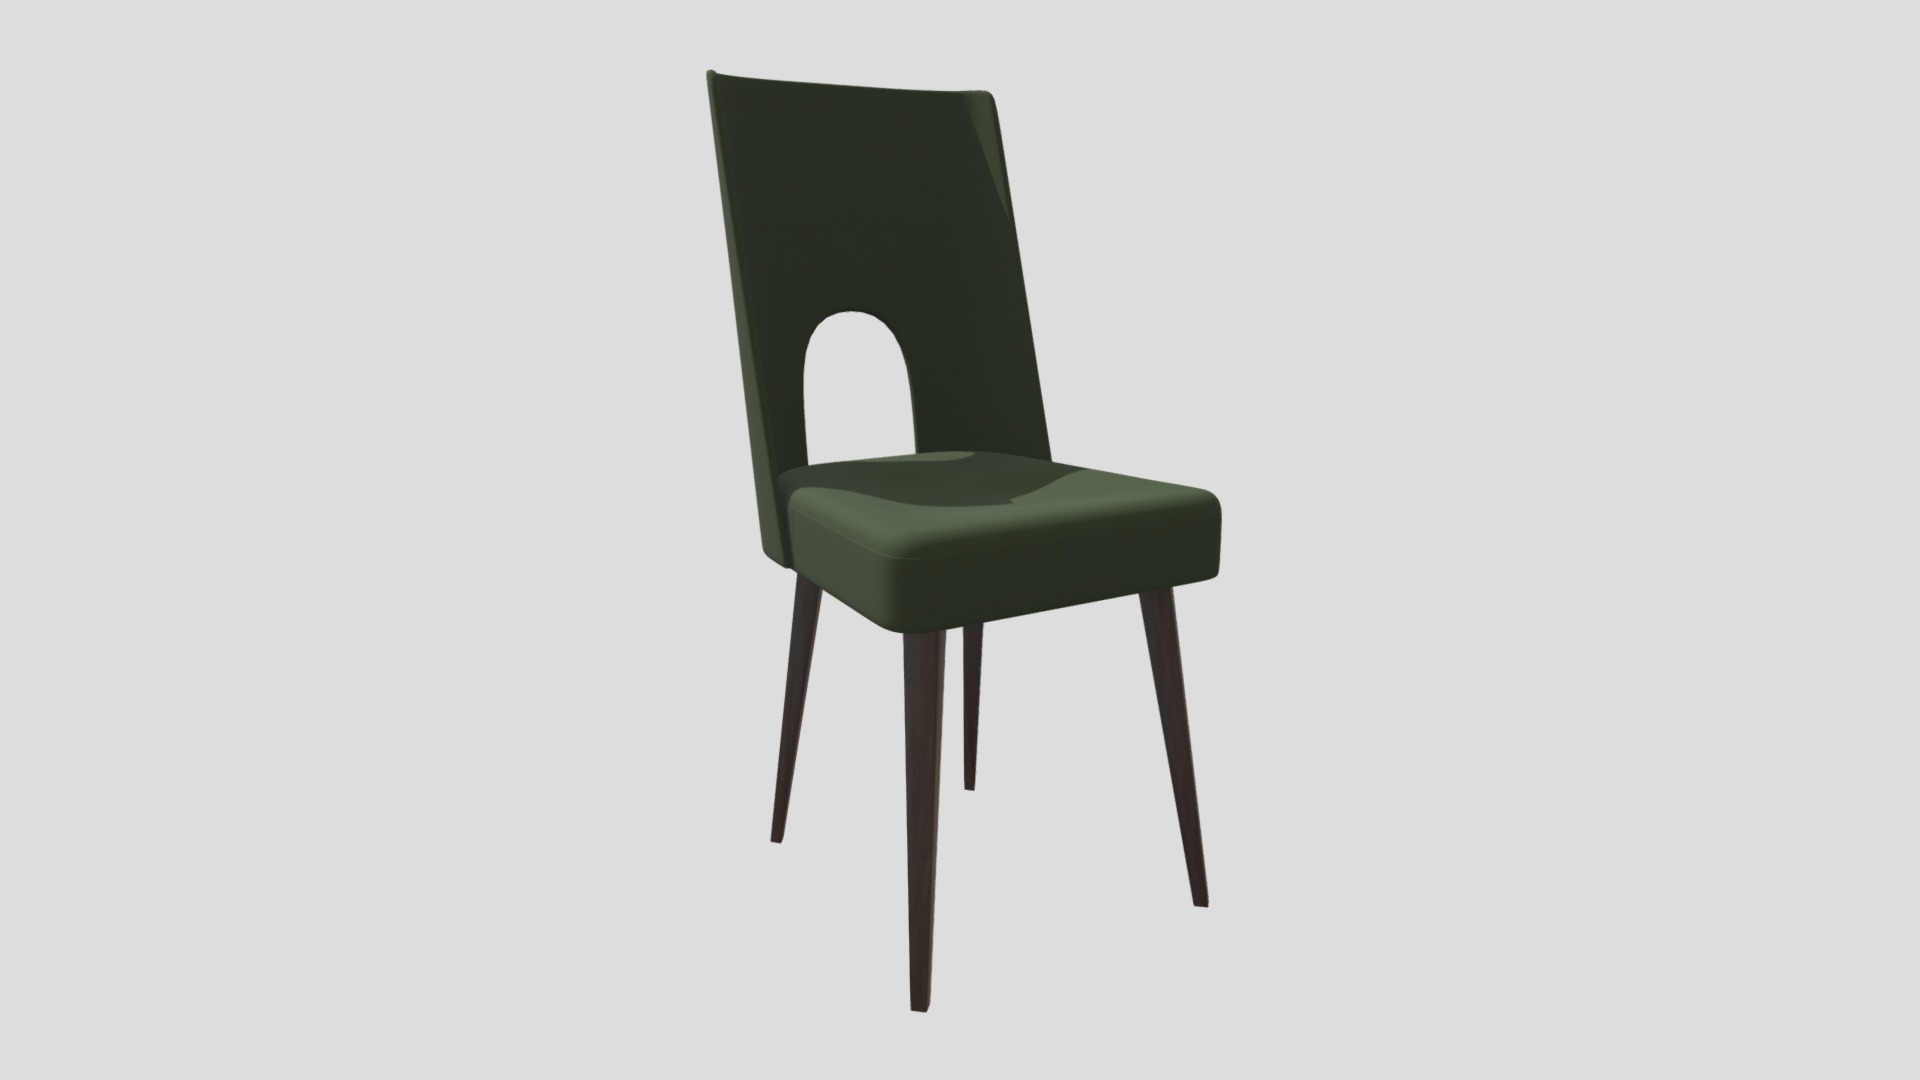 3D model Upholstered Chair - This is a 3D model of the Upholstered Chair. The 3D model is about a green chair with a white background.